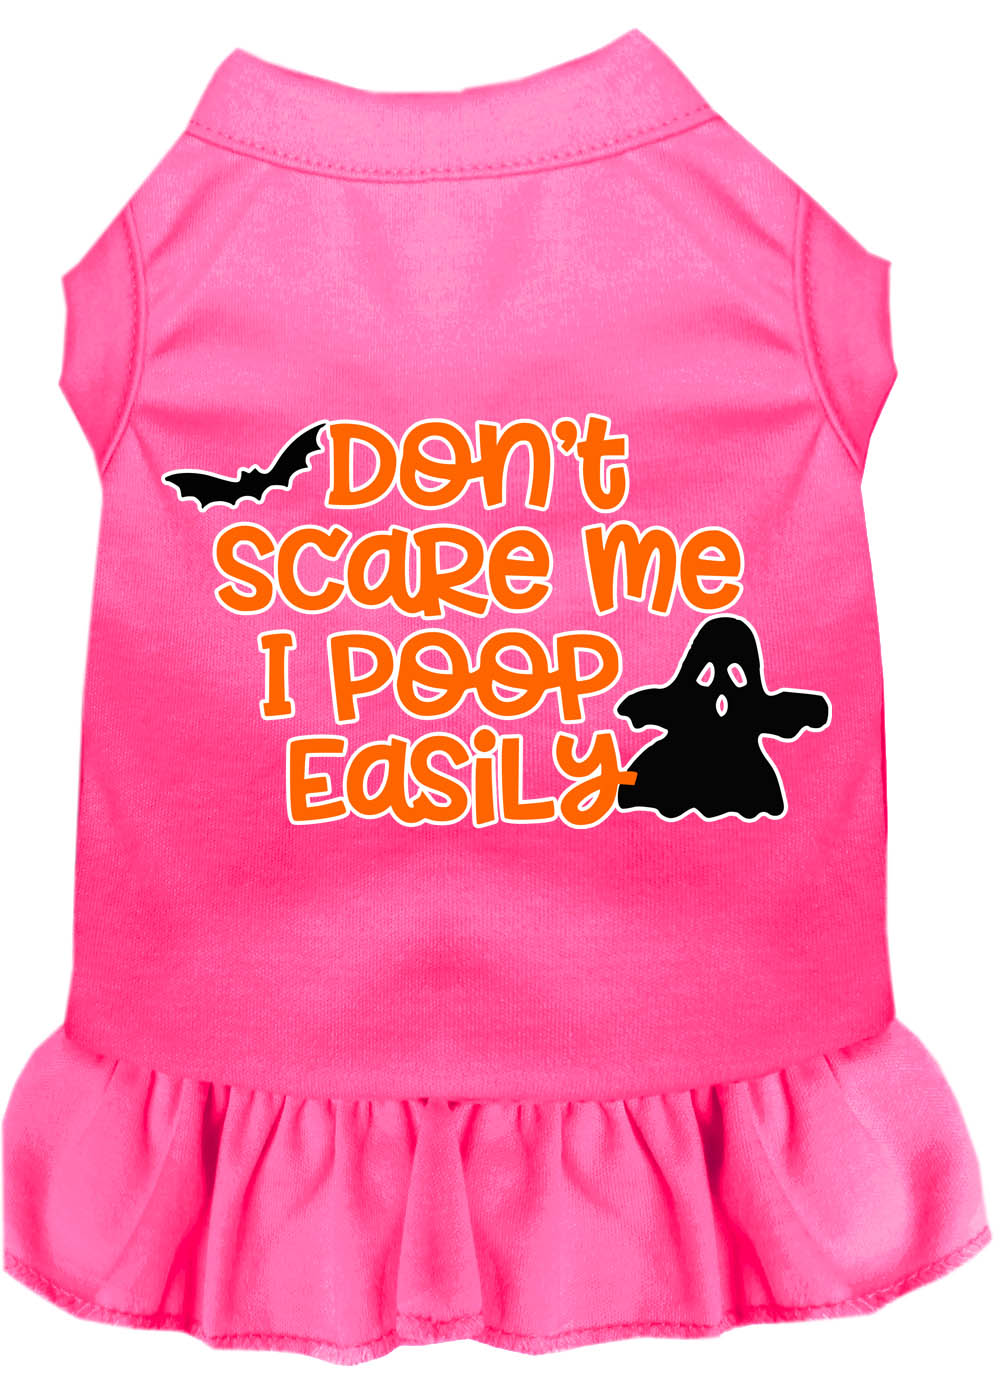 Don't Scare Me, Poops Easily Screen Print Dog Dress Bright Pink XS